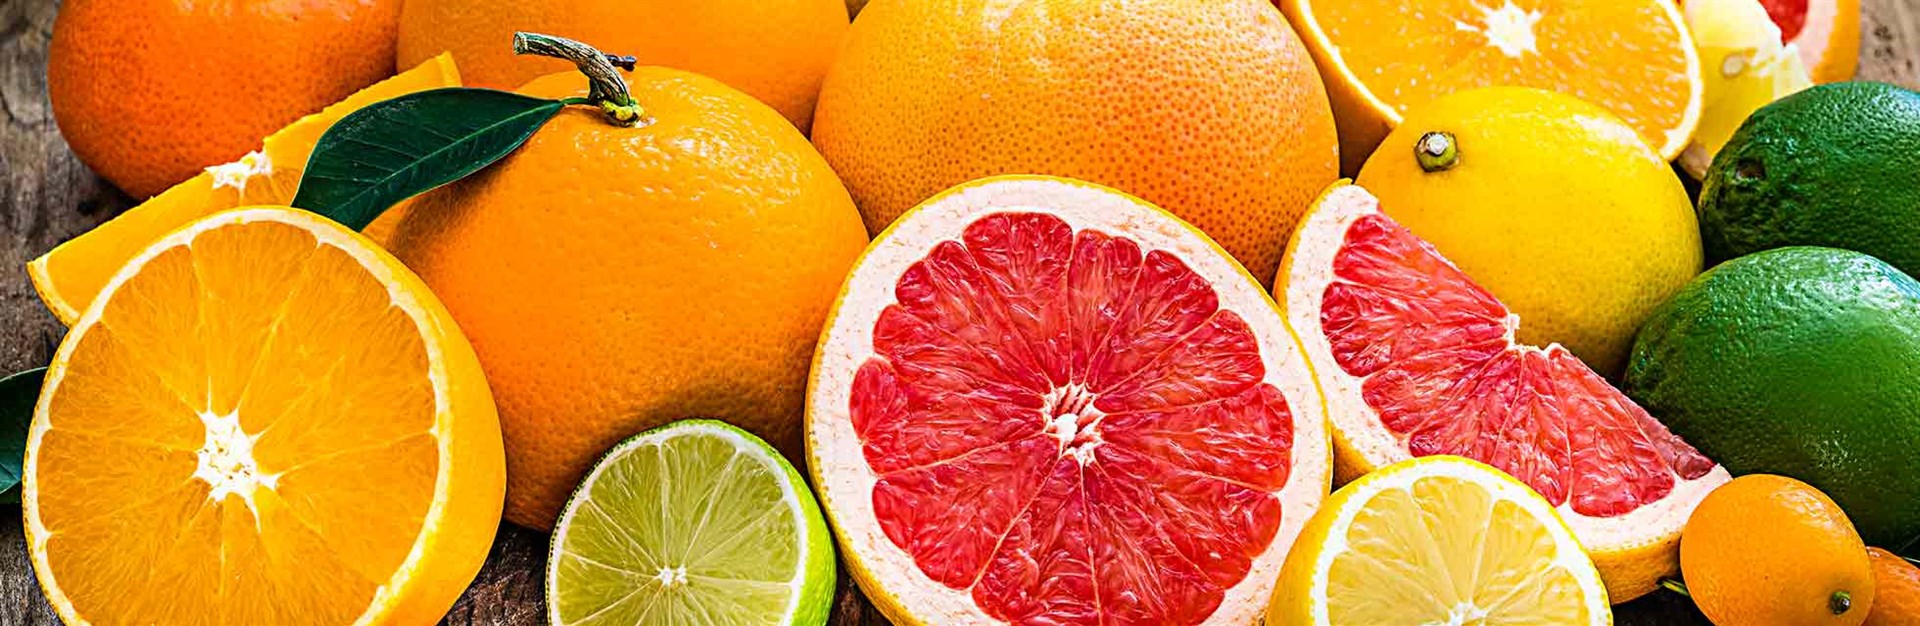 Selection of different kinds of citrus fruit